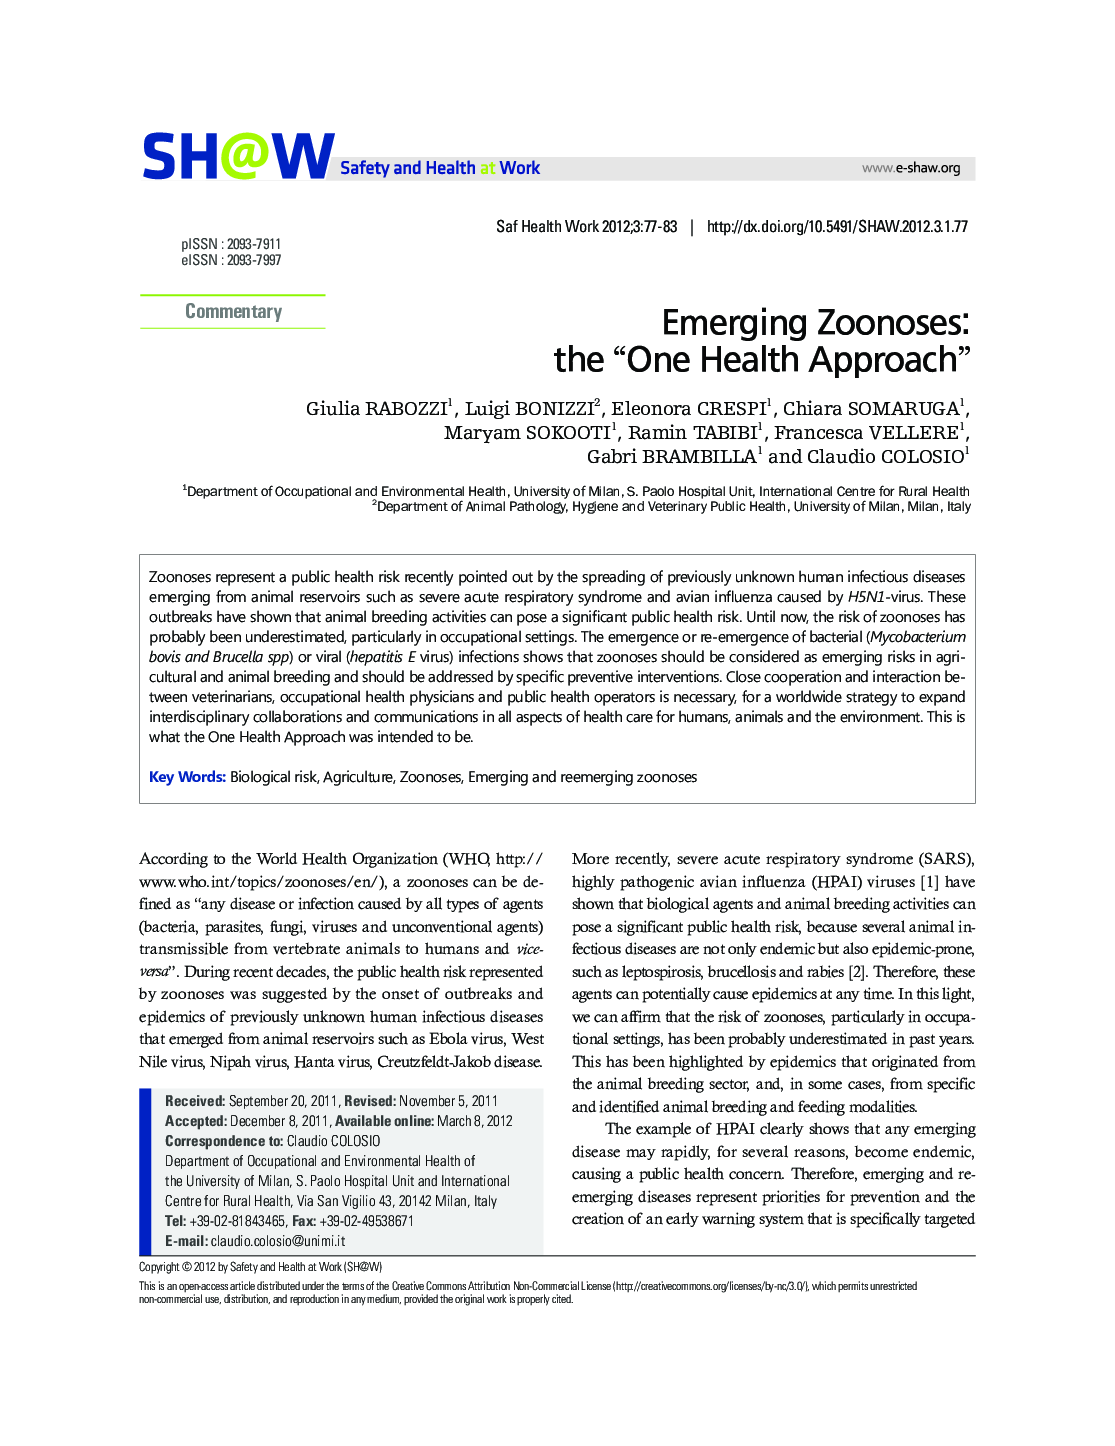 Emerging Zoonoses: the “One Health Approach”